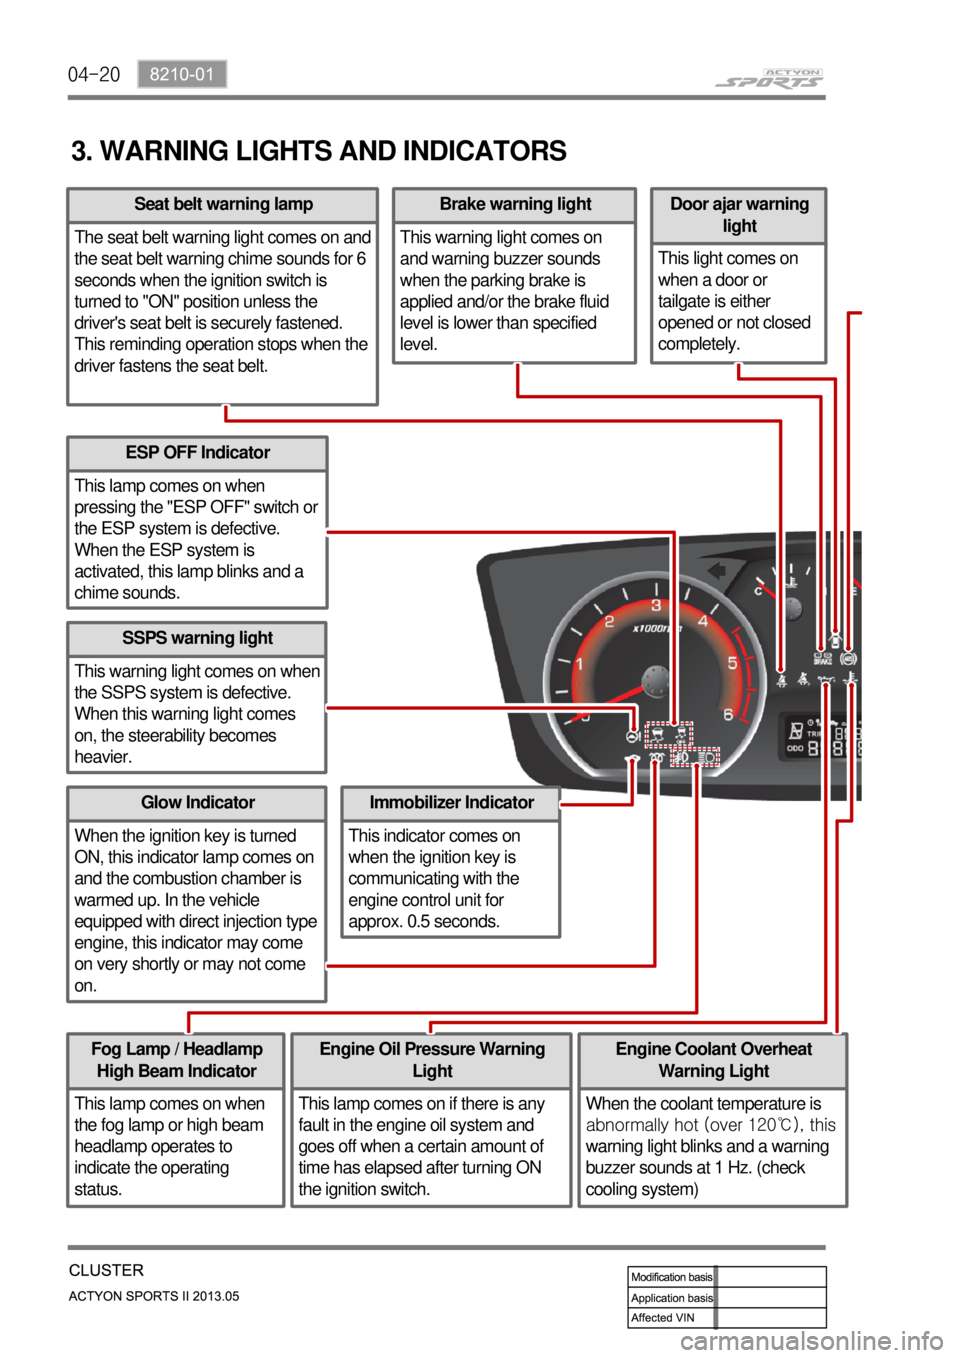 SSANGYONG NEW ACTYON SPORTS 2013  Service Manual 04-20
3. WARNING LIGHTS AND INDICATORS
ESP OFF Indicator
This lamp comes on when 
pressing the "ESP OFF" switch or 
the ESP system is defective. 
When the ESP system is 
activated, this lamp blinks an